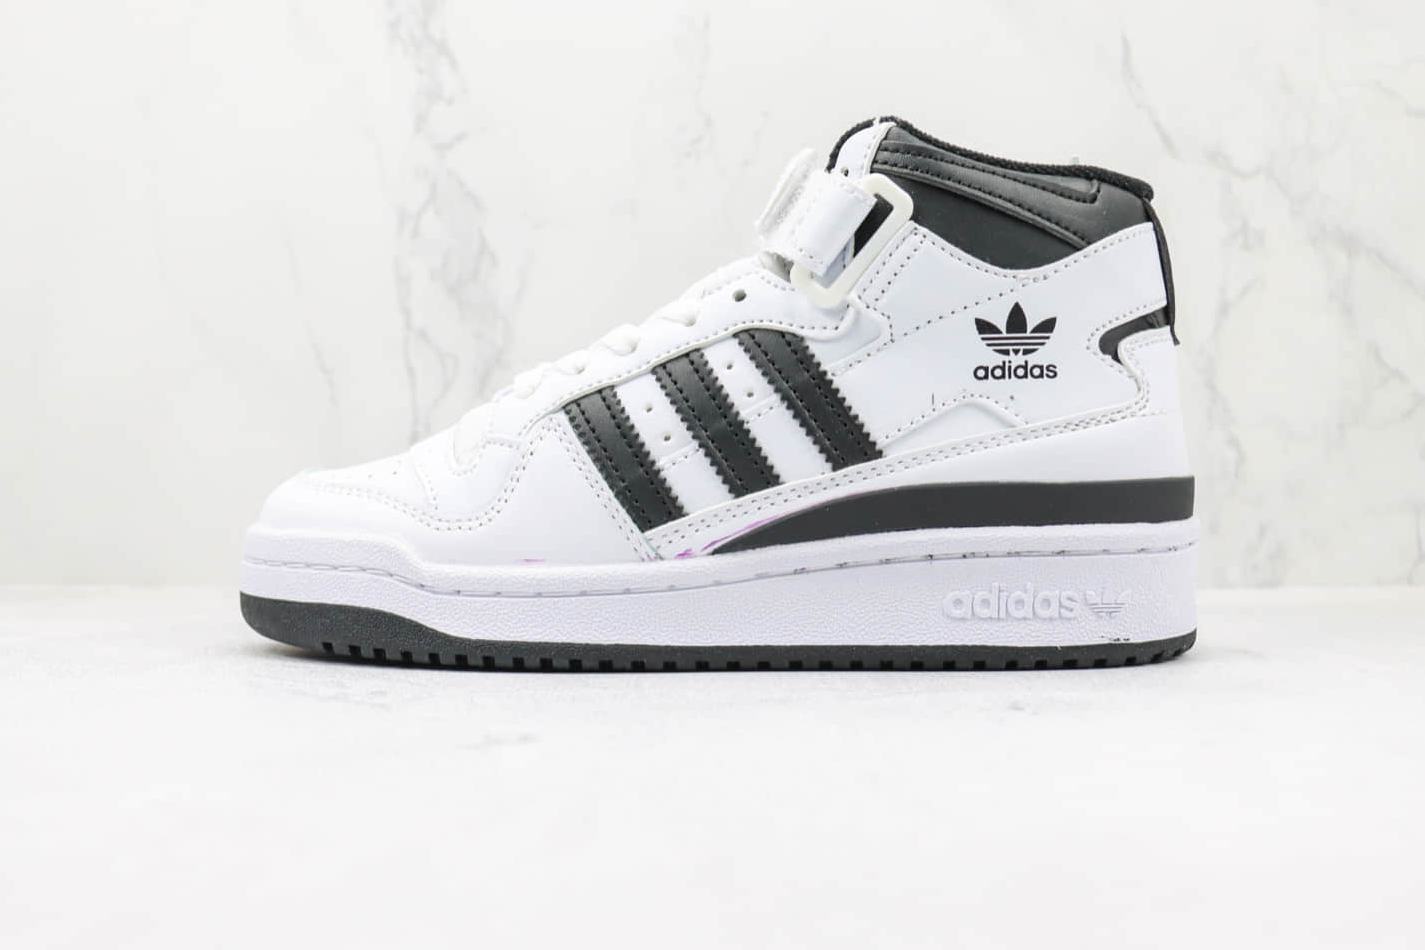 Adidas Forum Mid 'White Black' FY7939 - Stylish and Classic Sneakers